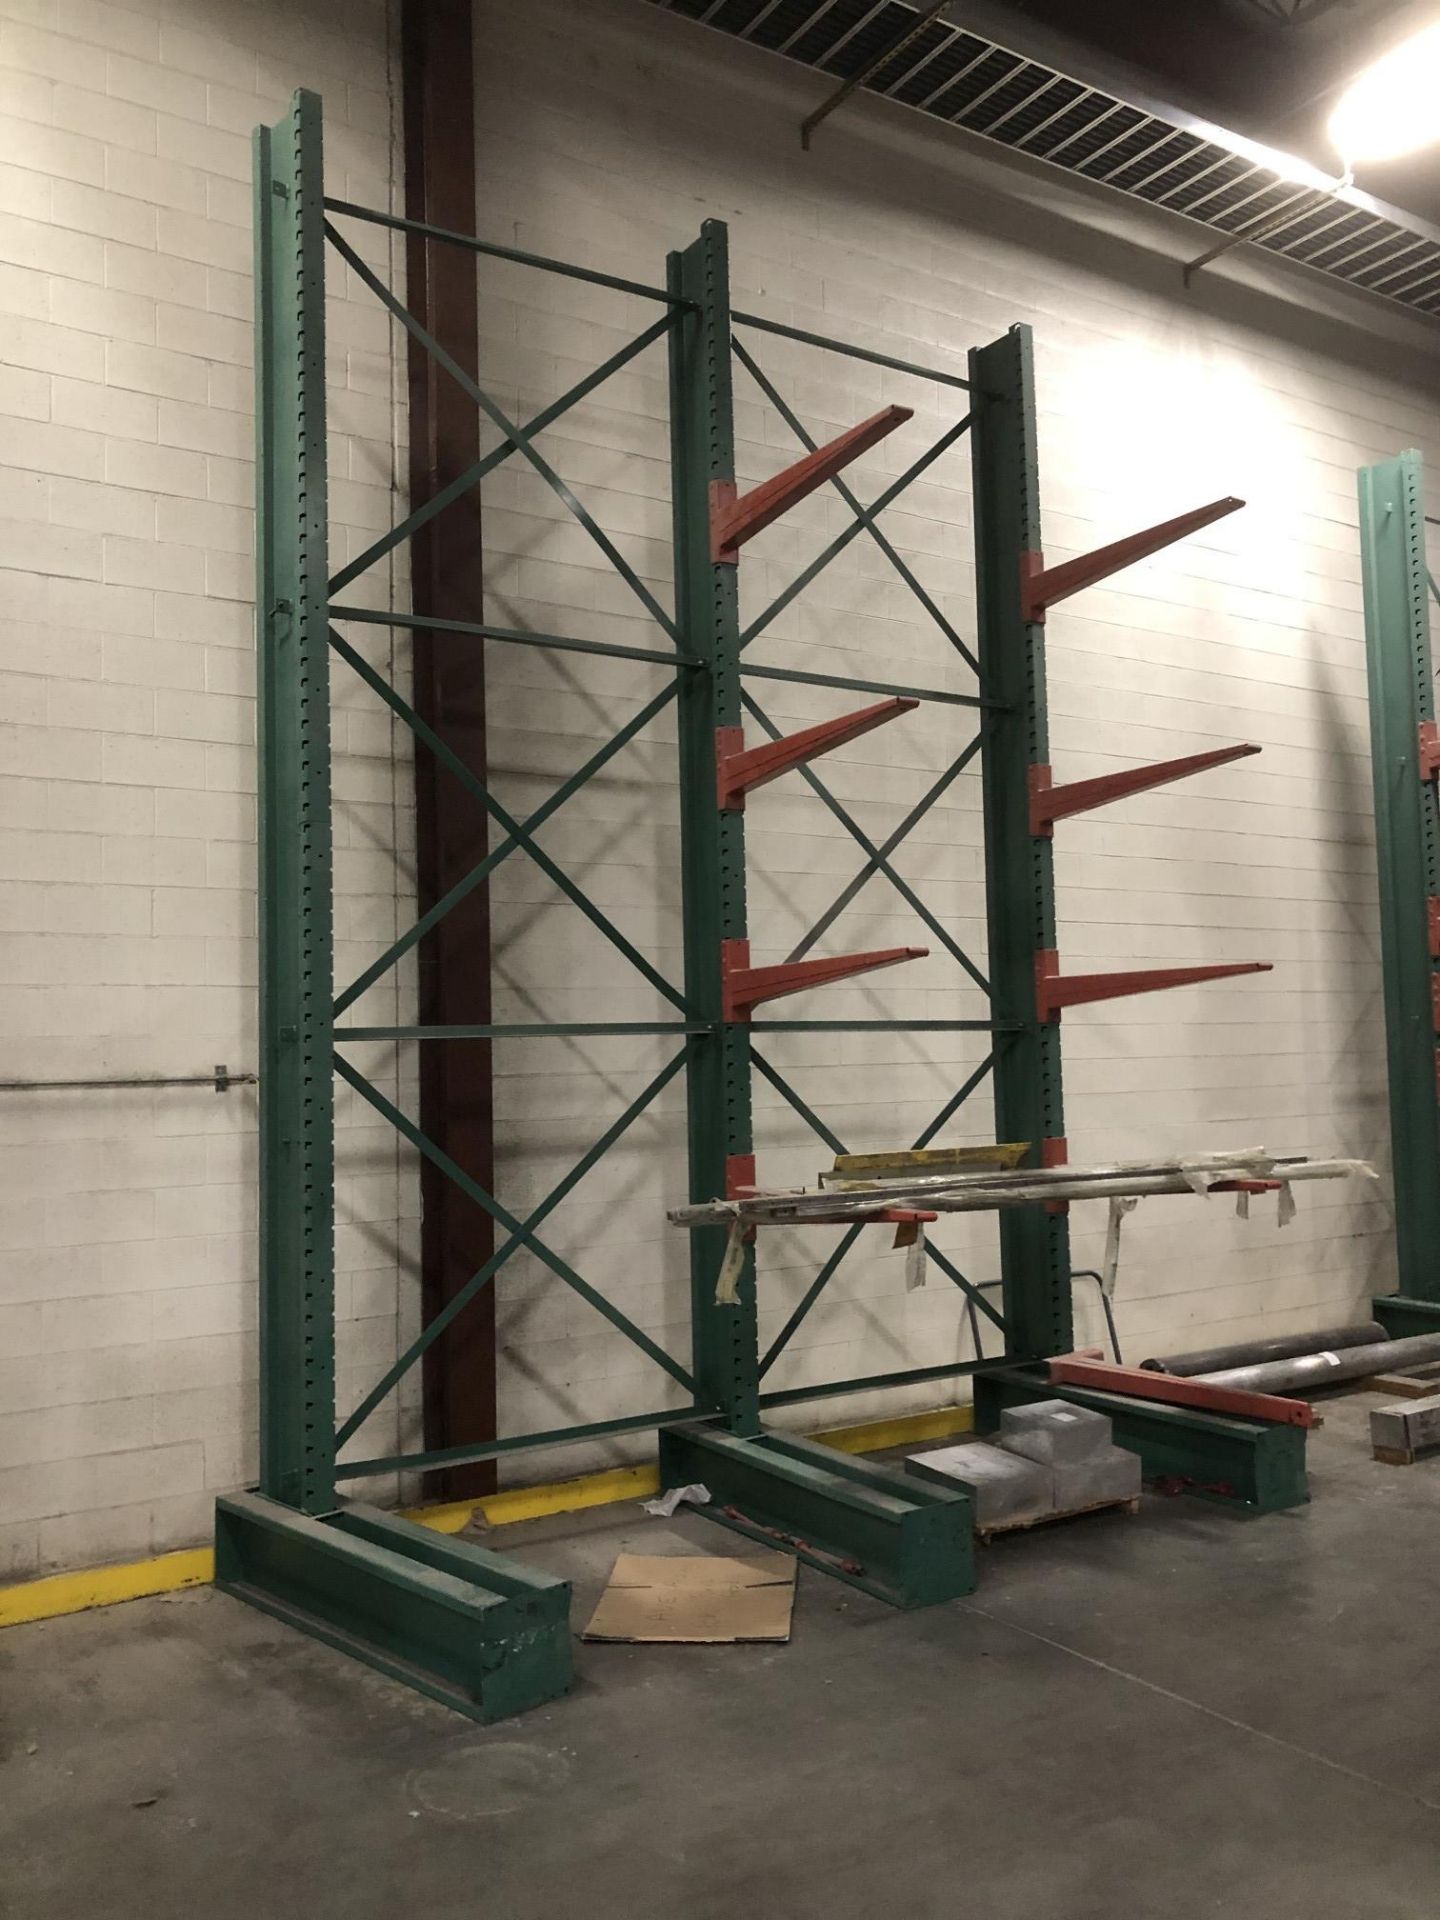 Cantilever Rack (18' High x 12' Wide x 4' Arms) - Image 2 of 2